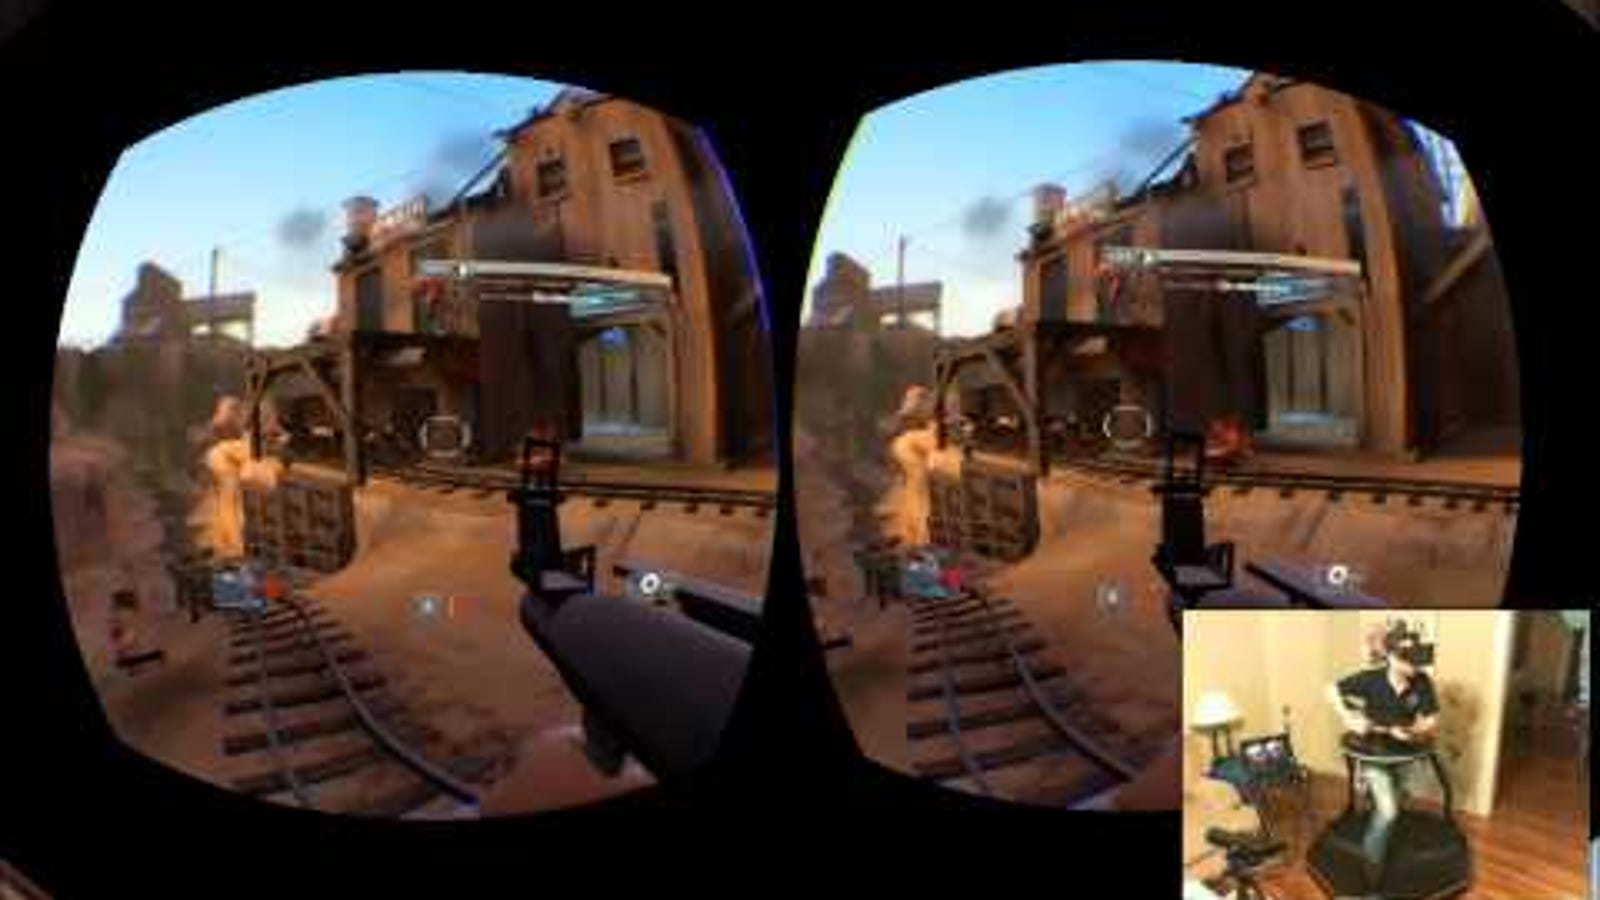 Watch A Gamer Combine A Vr Headset With An Omnidirectional